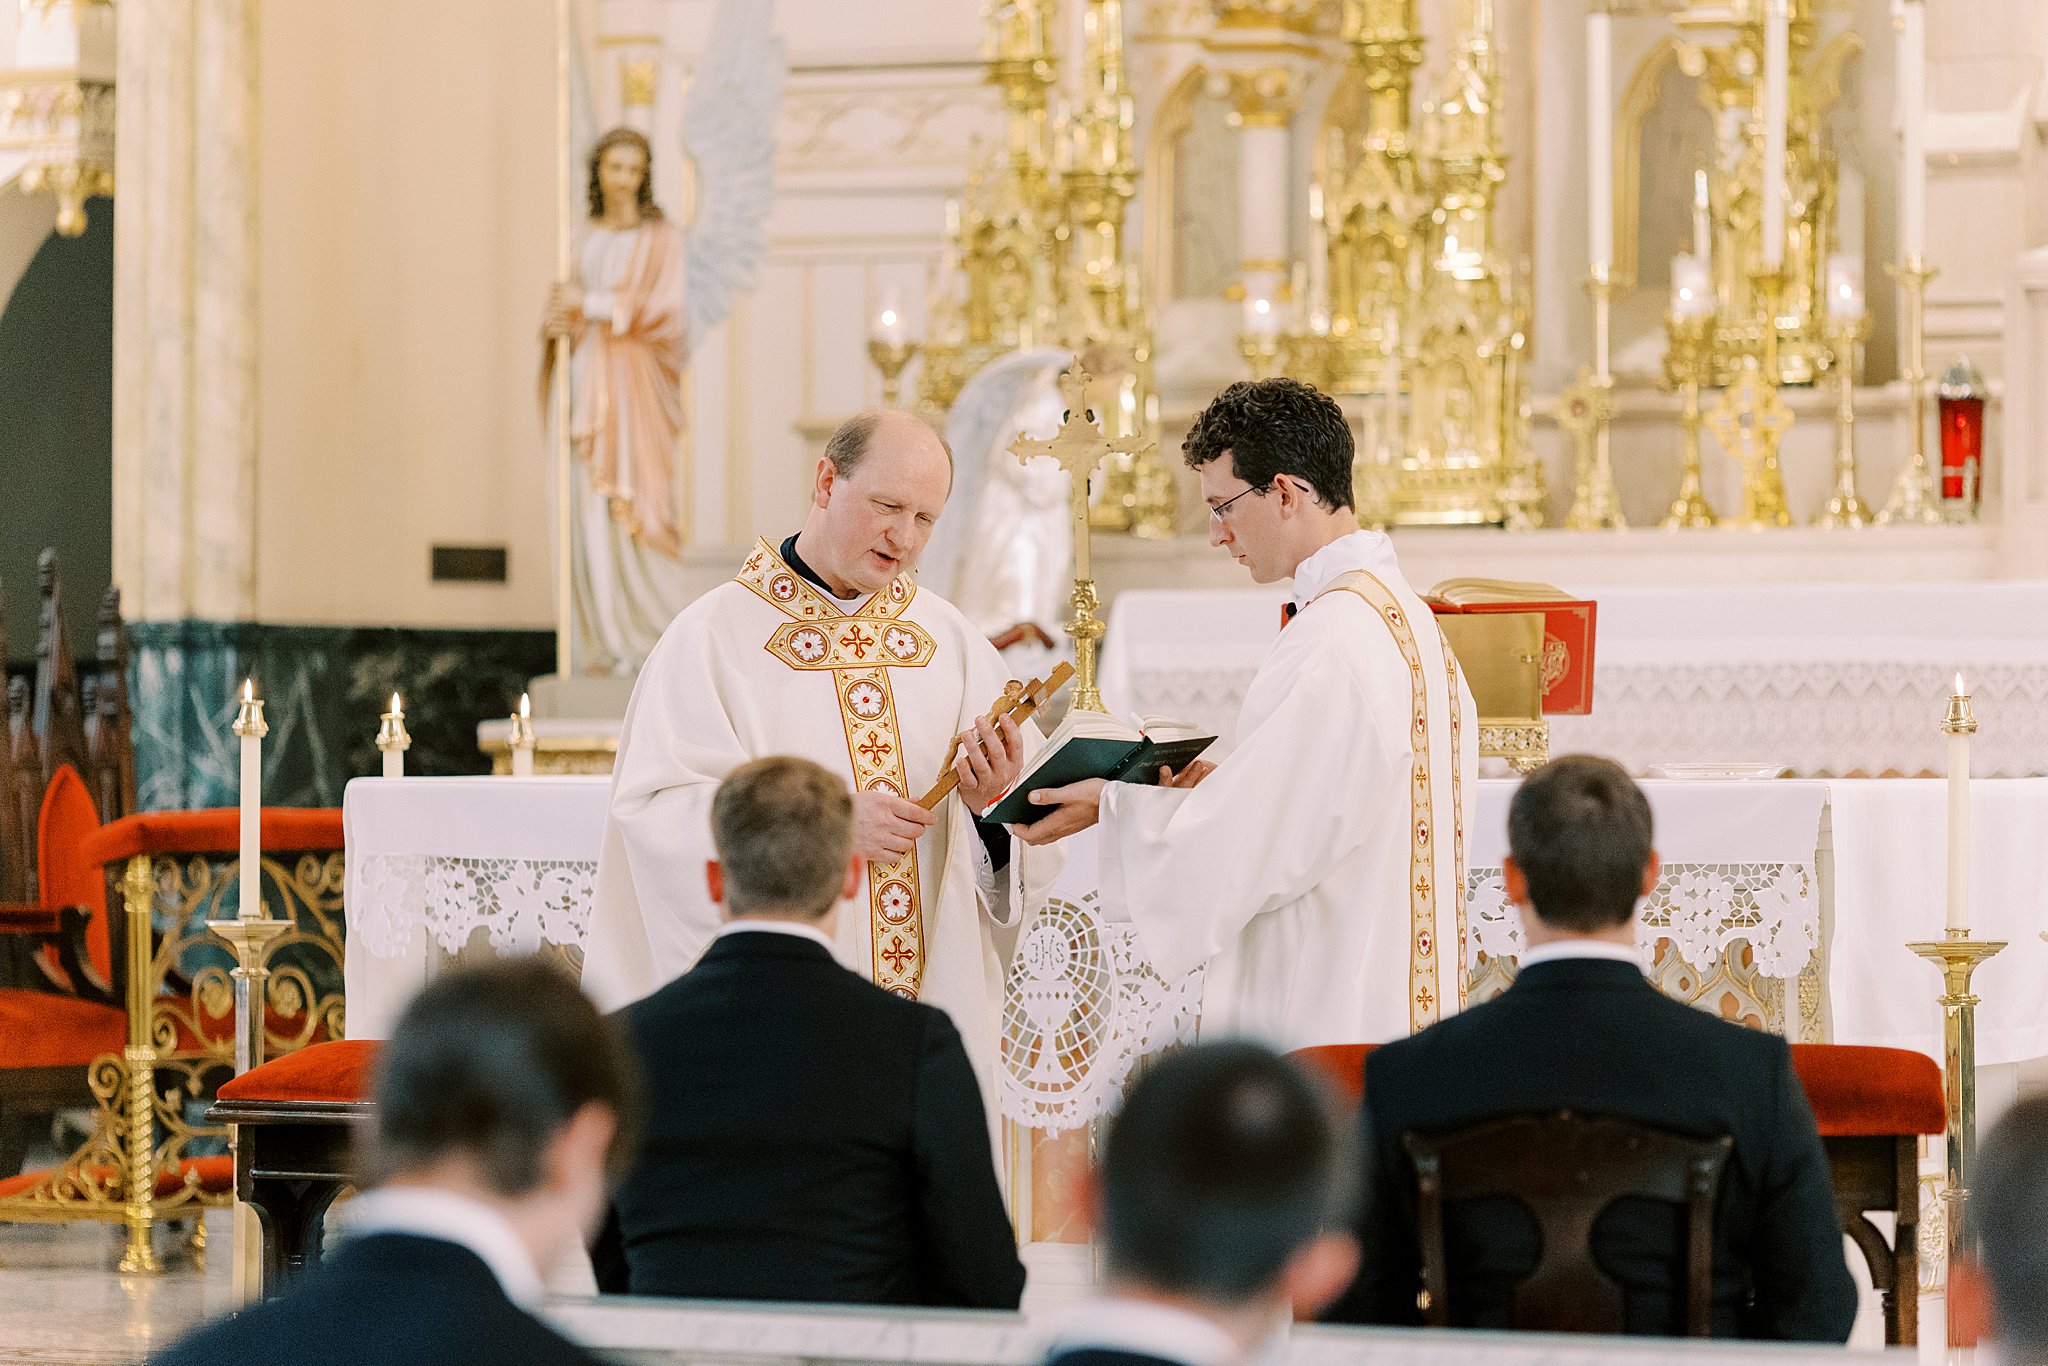 Croatian-tradition-of-the-cross-at-a-catholic-wedding-mass-in-detroit-michigan